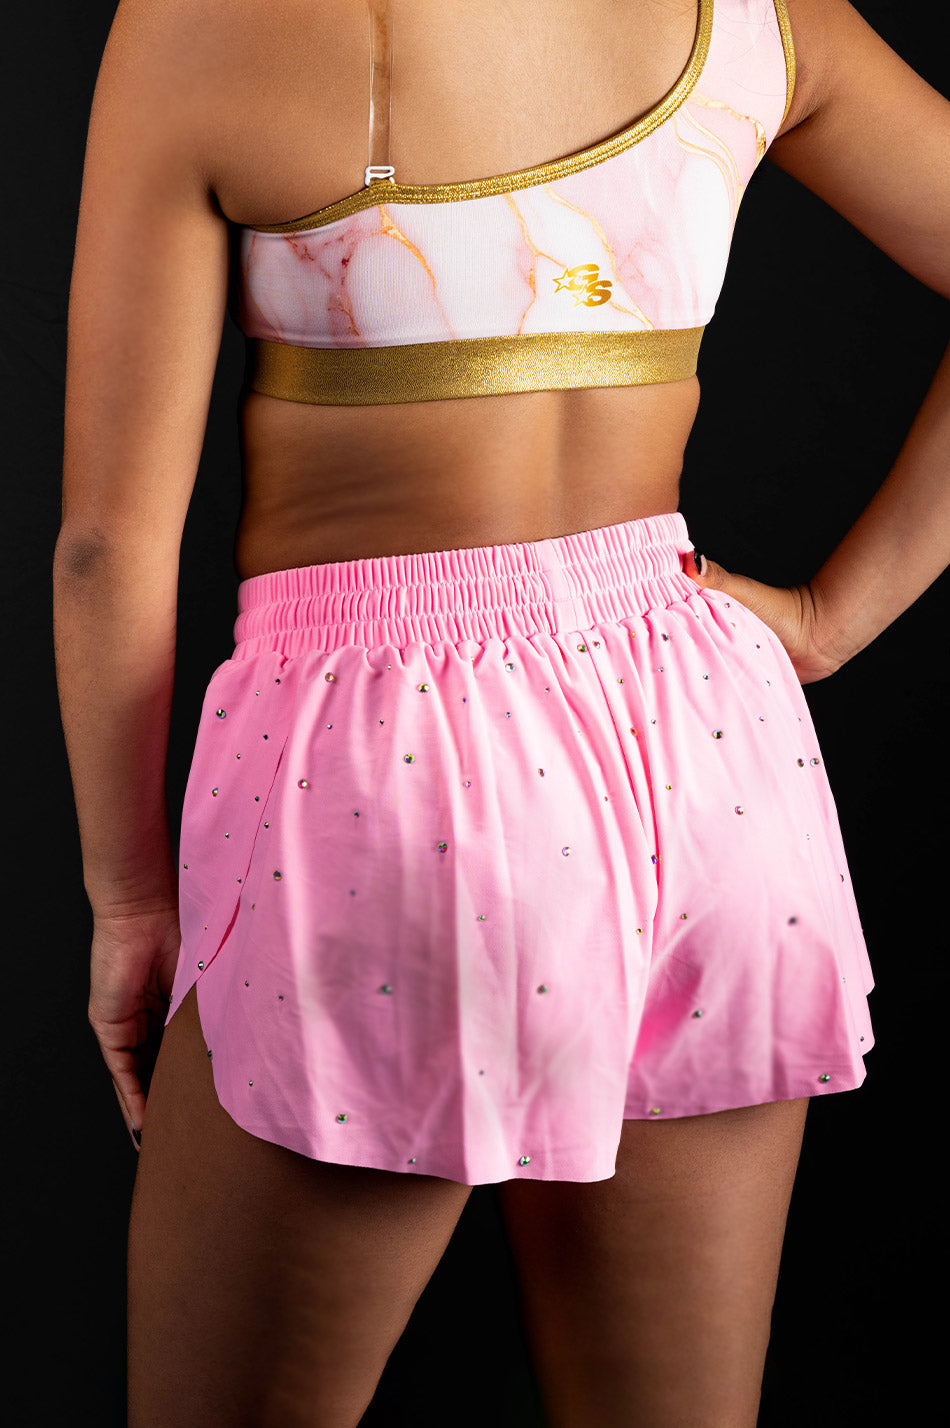 Pink Fly shorts with Gold Spanx - C16